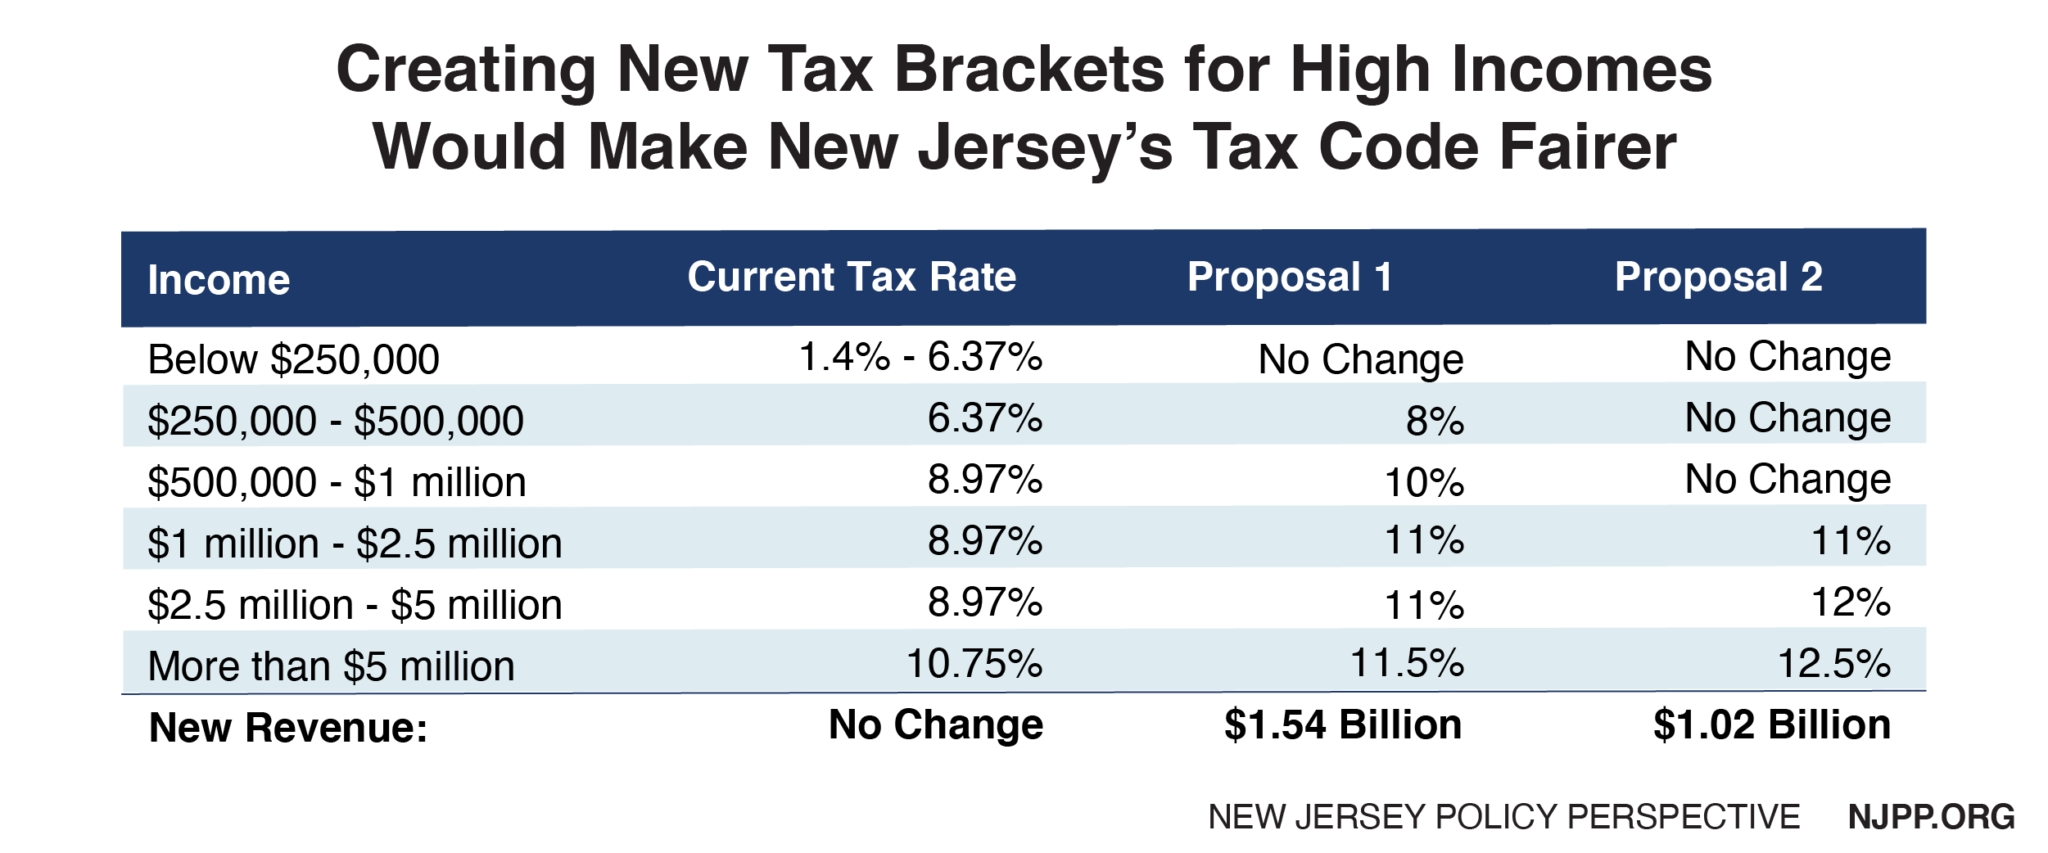 Road to Recovery Reforming New Jersey’s Tax Code New Jersey